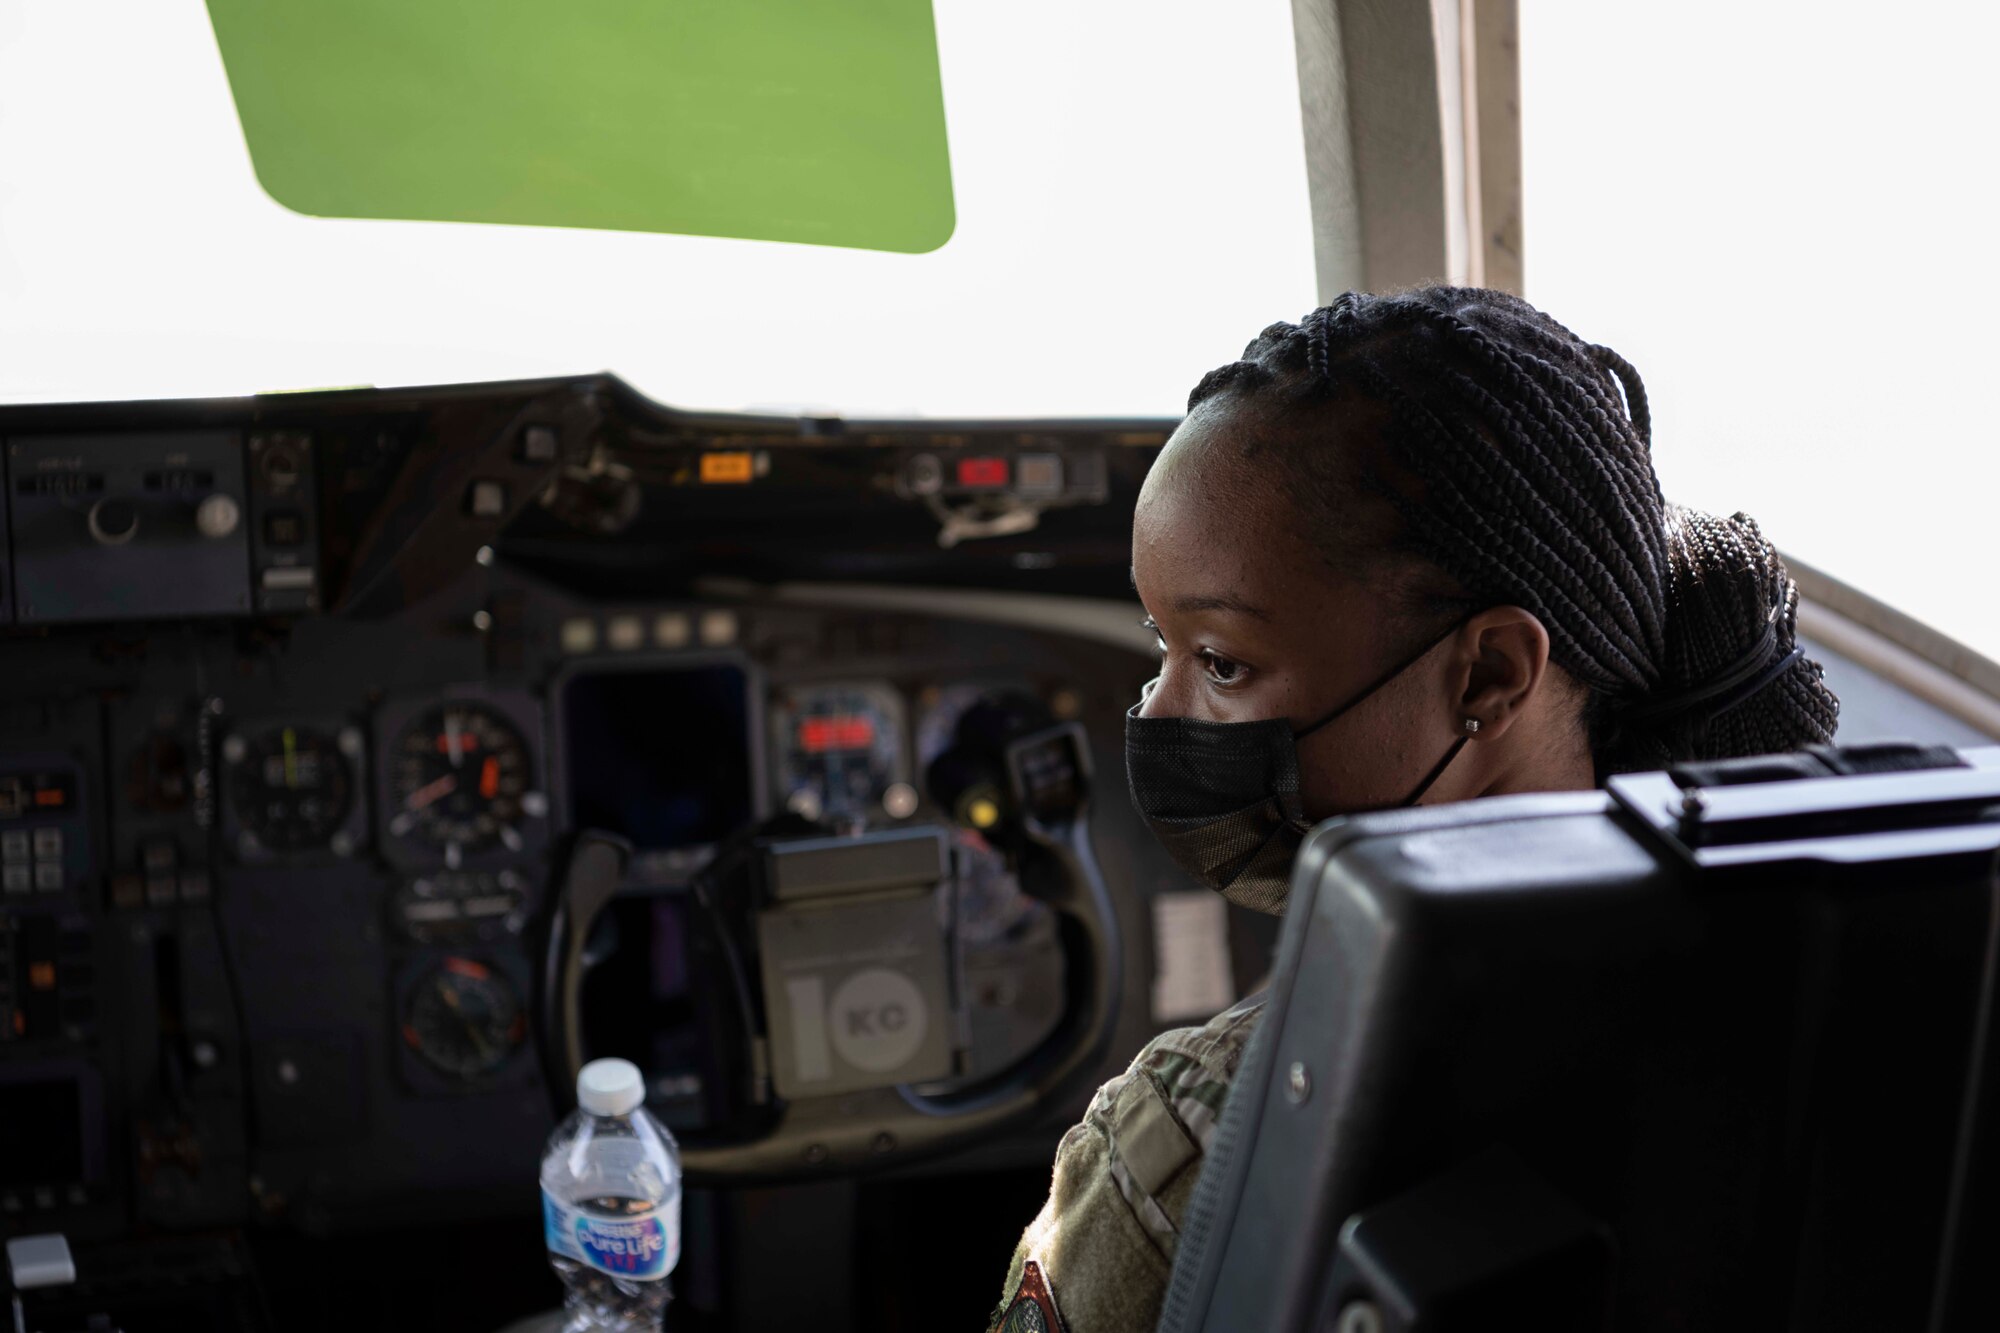 Airman sits in the co-pilots seat in an aircraft